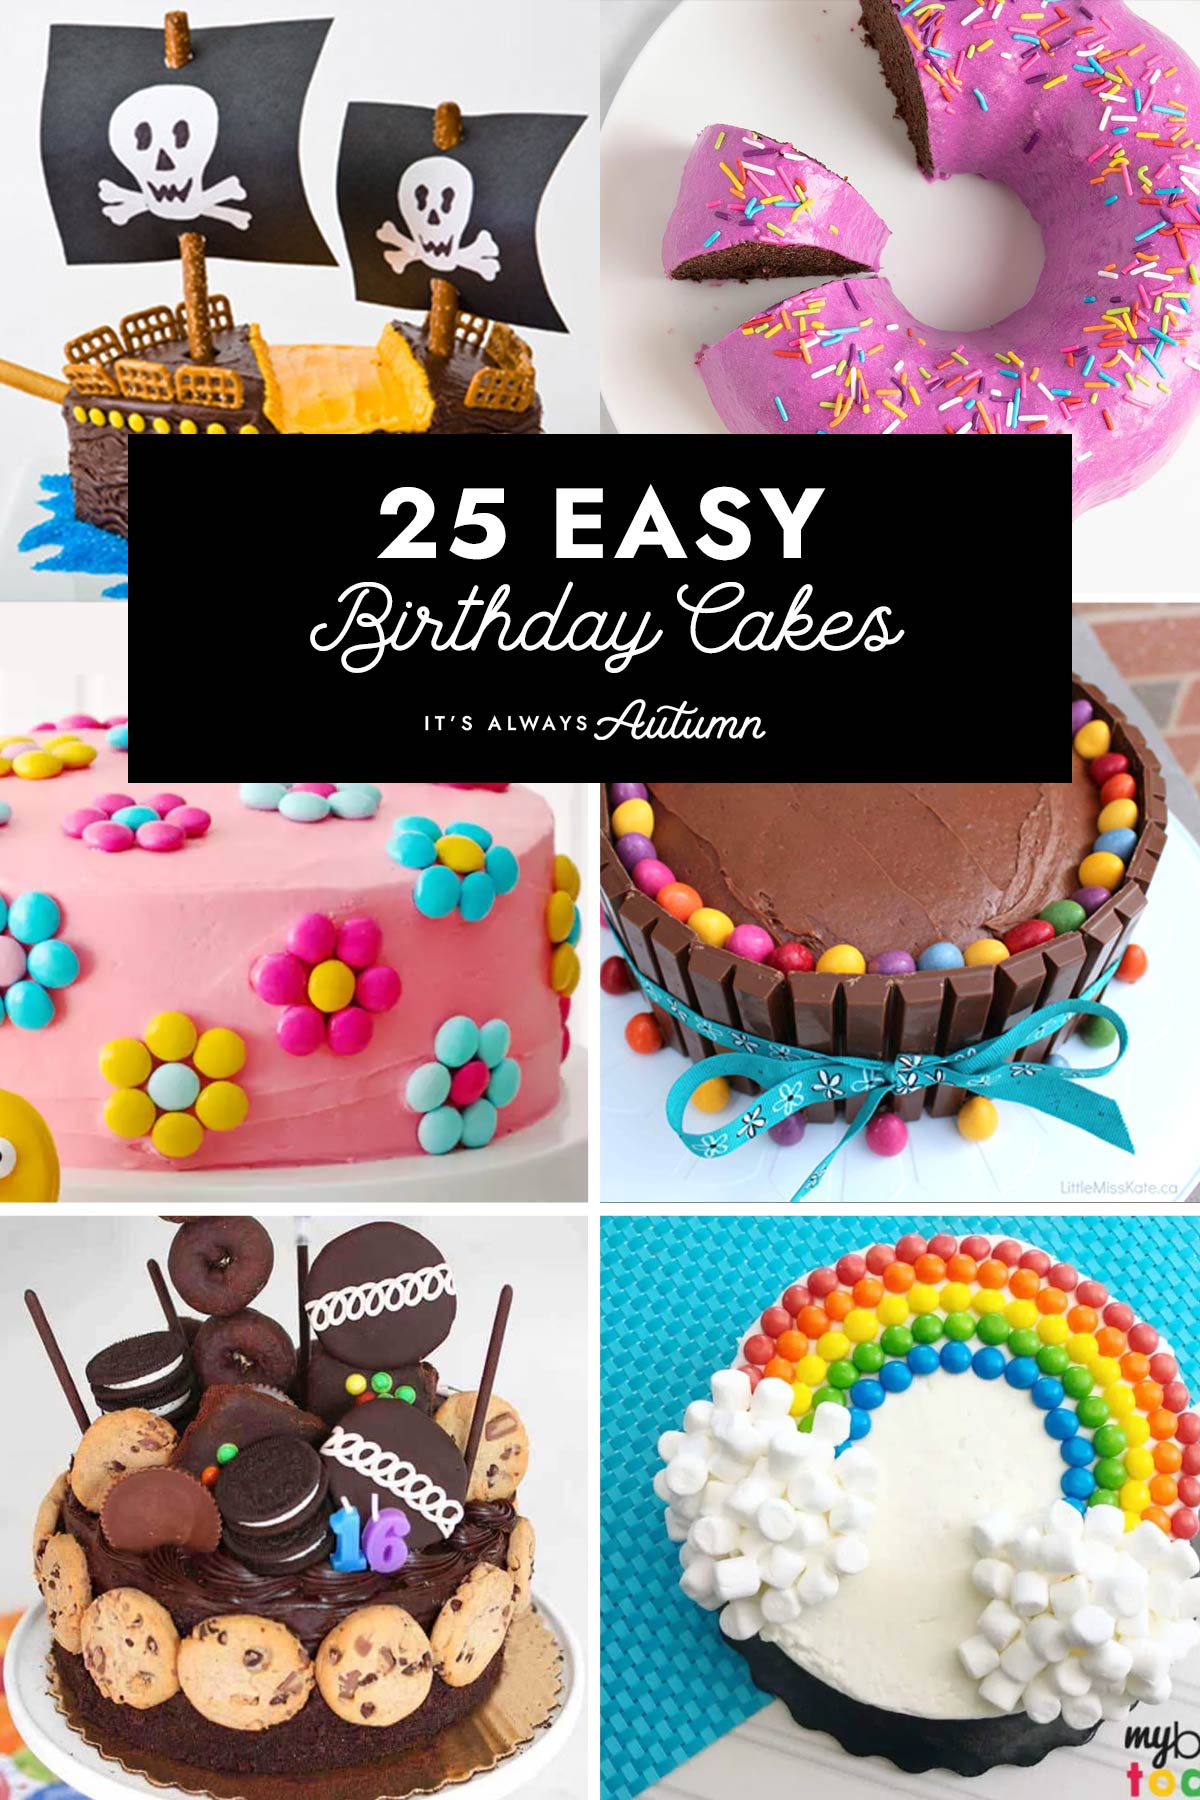 38 Most Popular Girl 1st Birthday Cakes! | Catch My Party